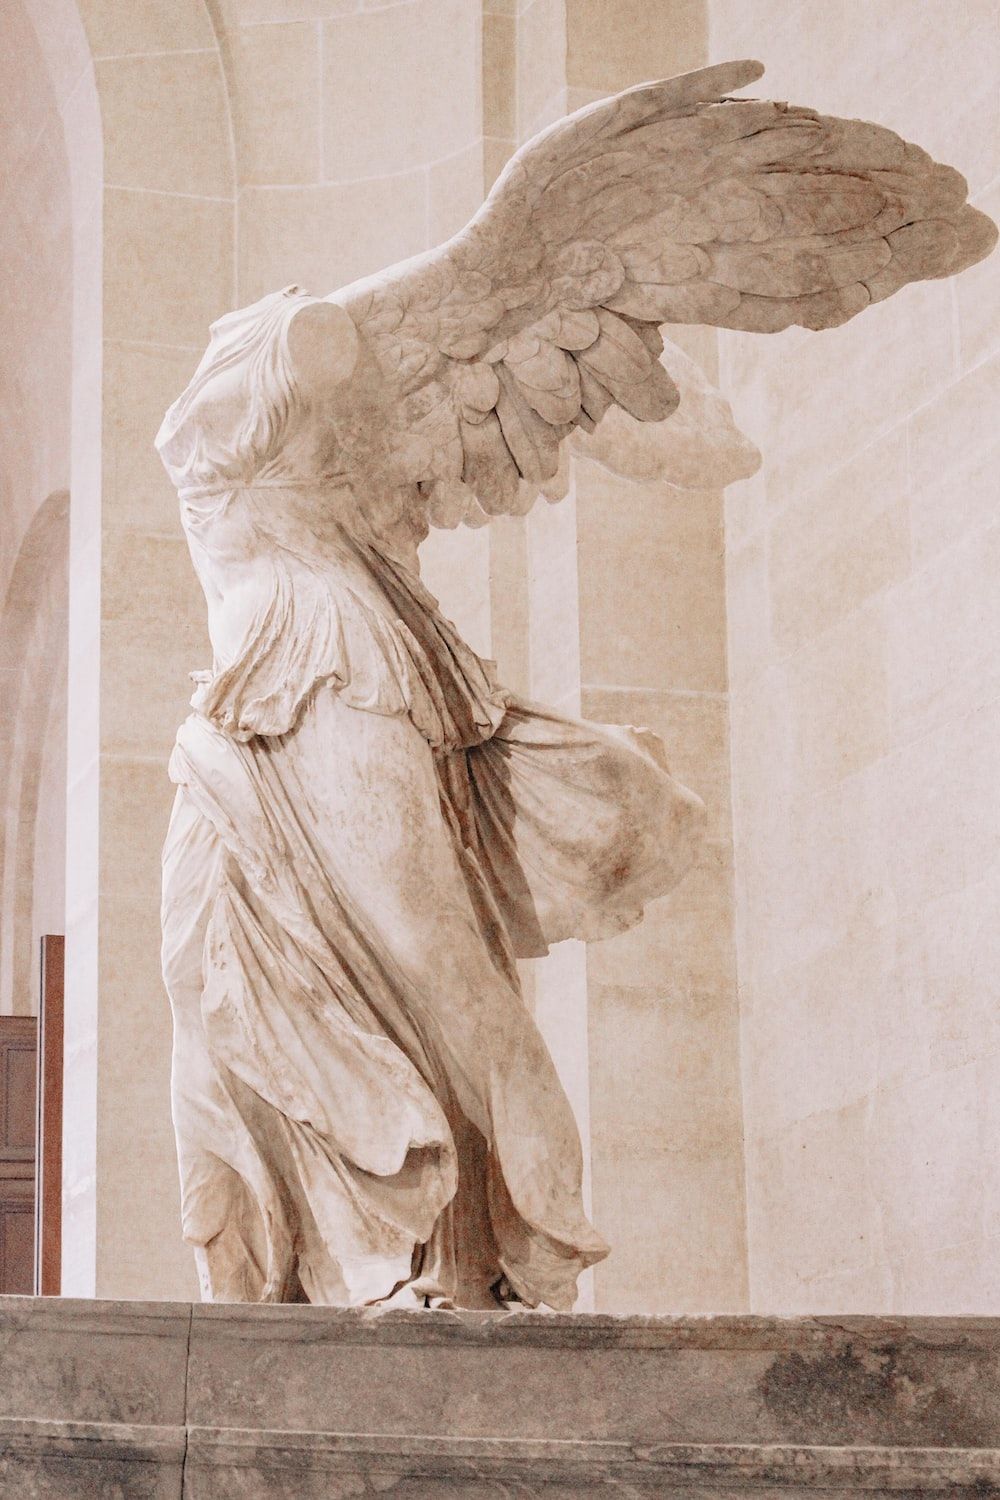 A statue of an angel with wings spread - Greek statue